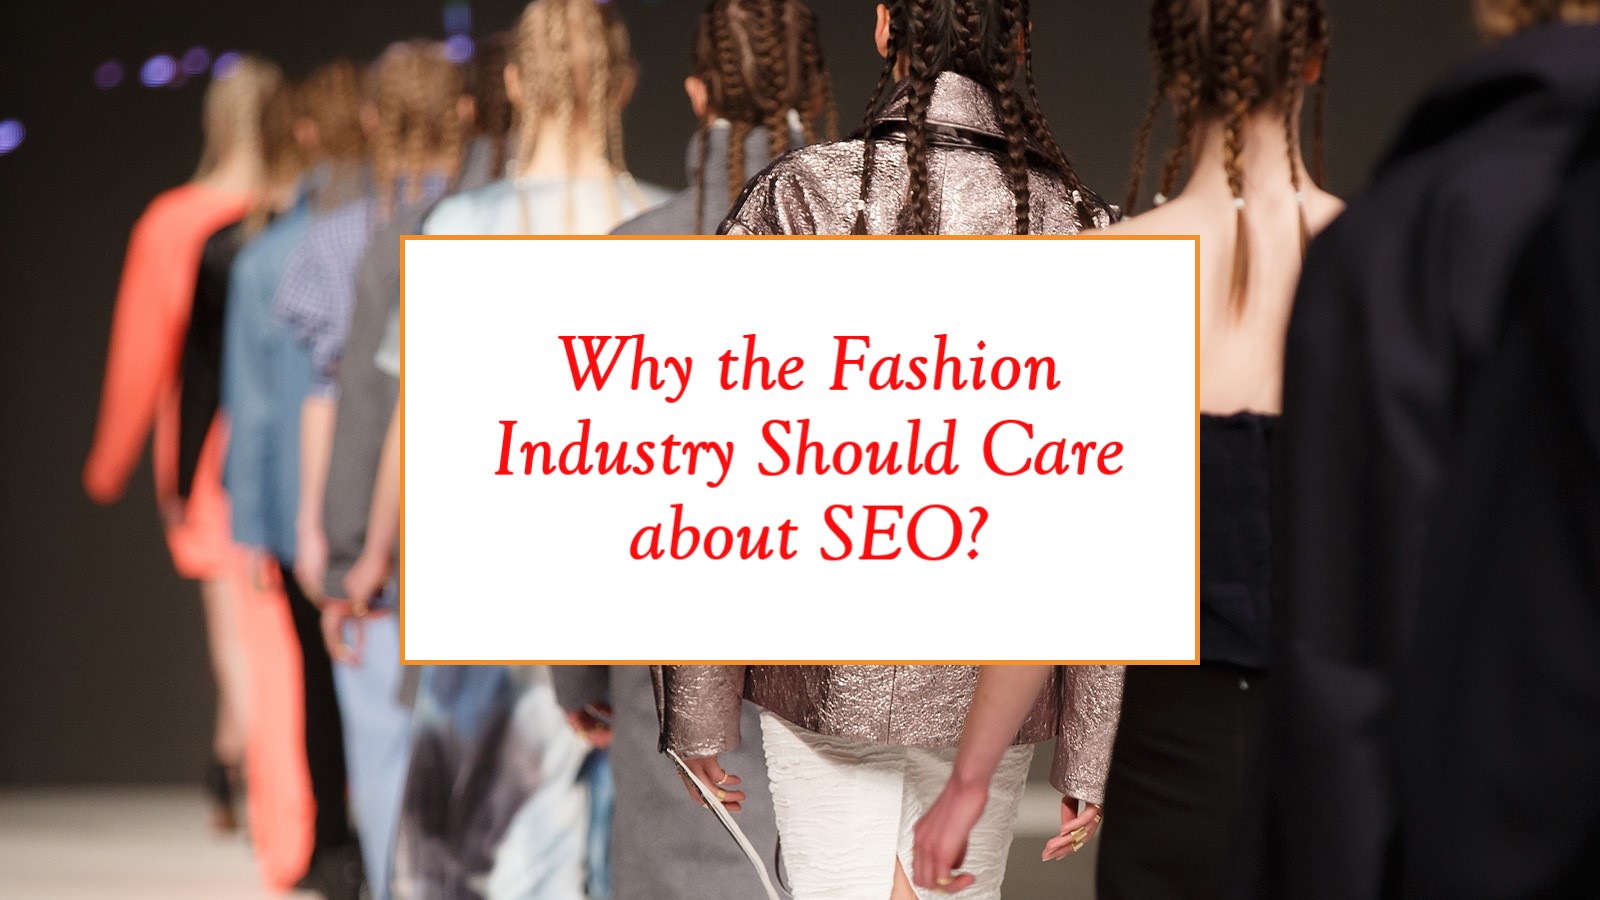 Why the Fashion Industry Should Care about SEO?